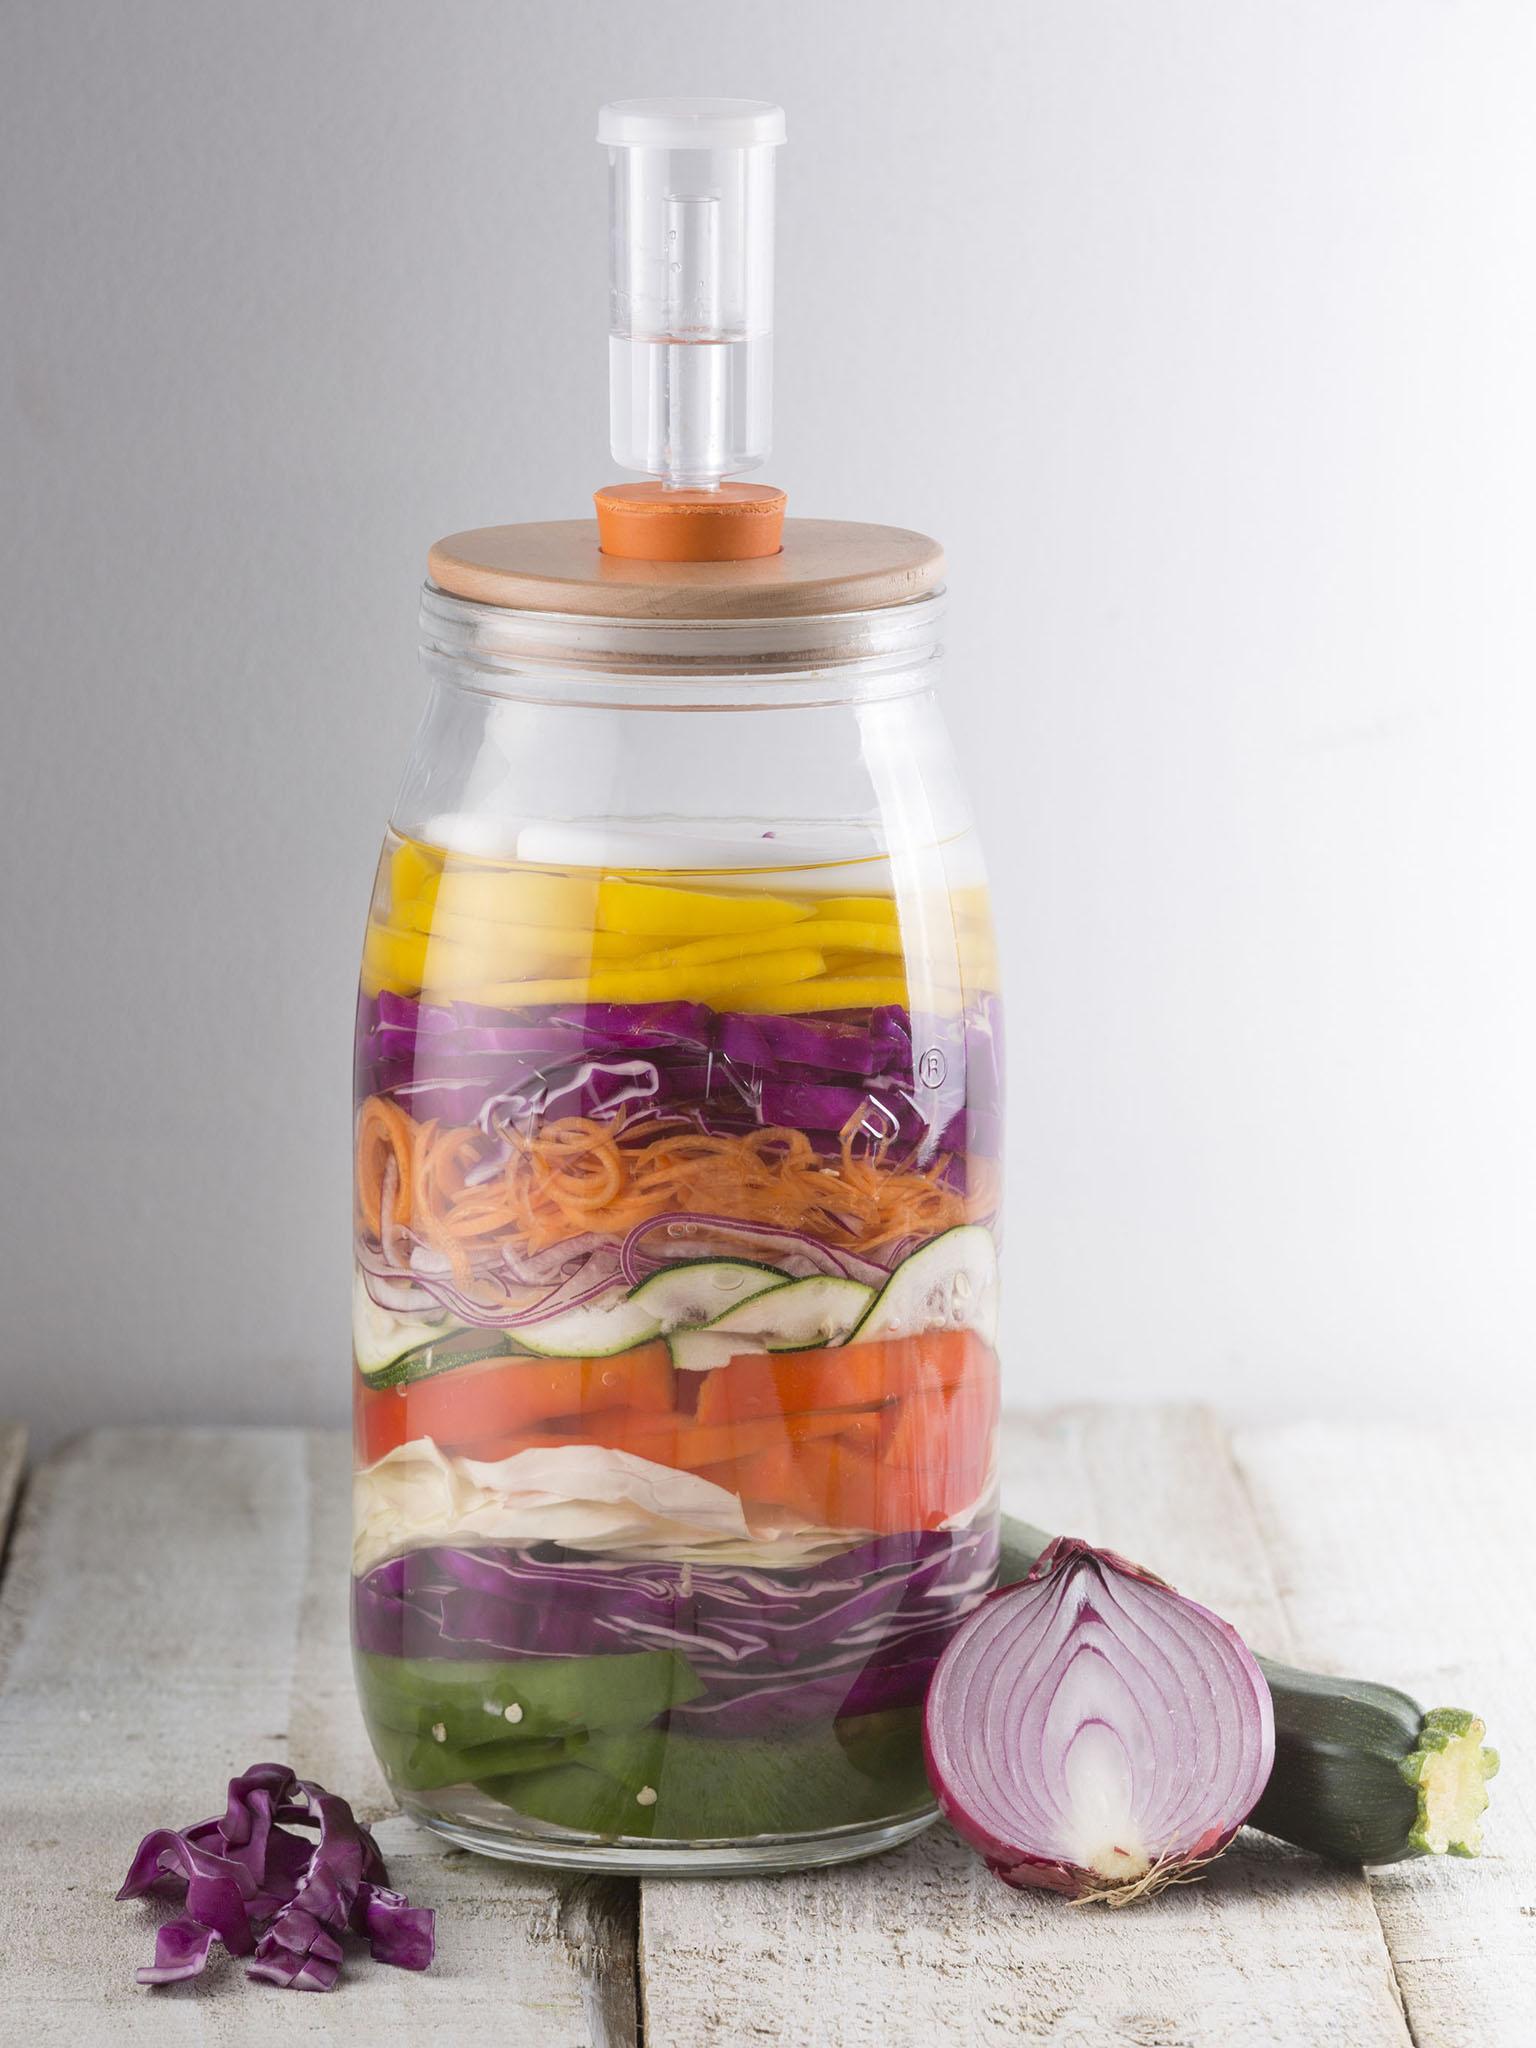 &#13;
The Kilner fermentation set which uses a wooden push-top lid with an air lock system &#13;